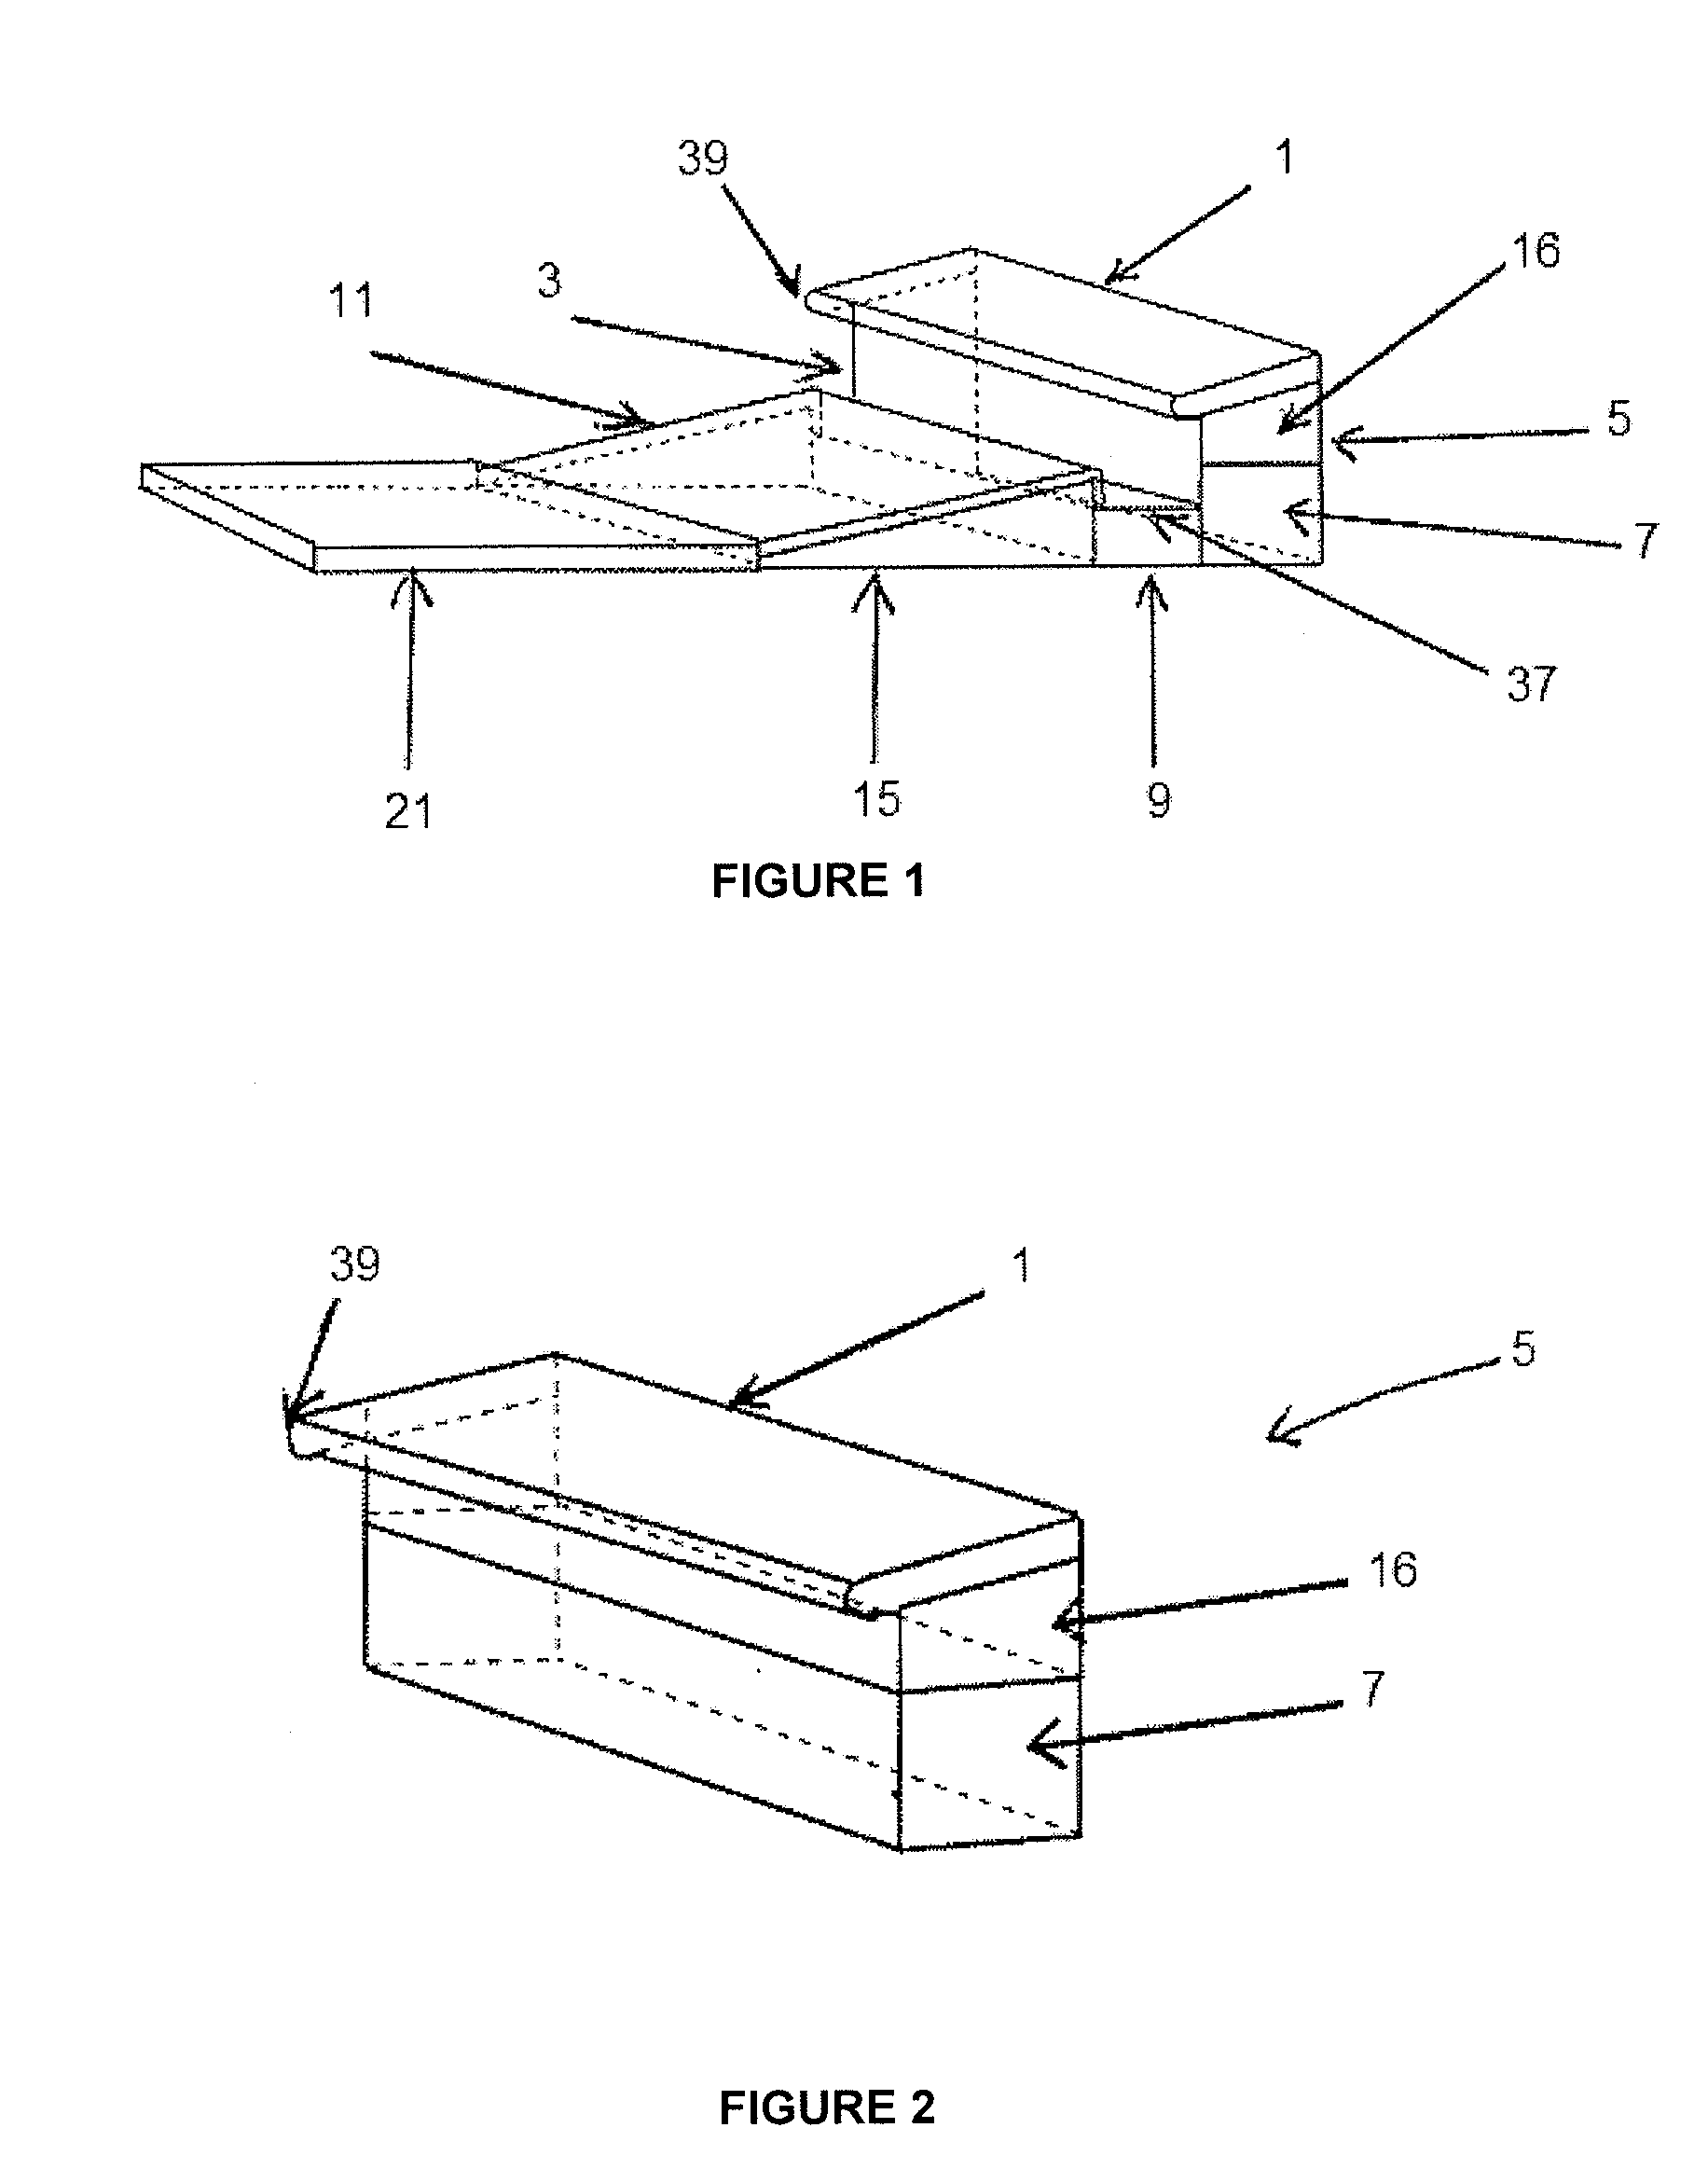 Ergonomic support apparatus and method for assisting sleep